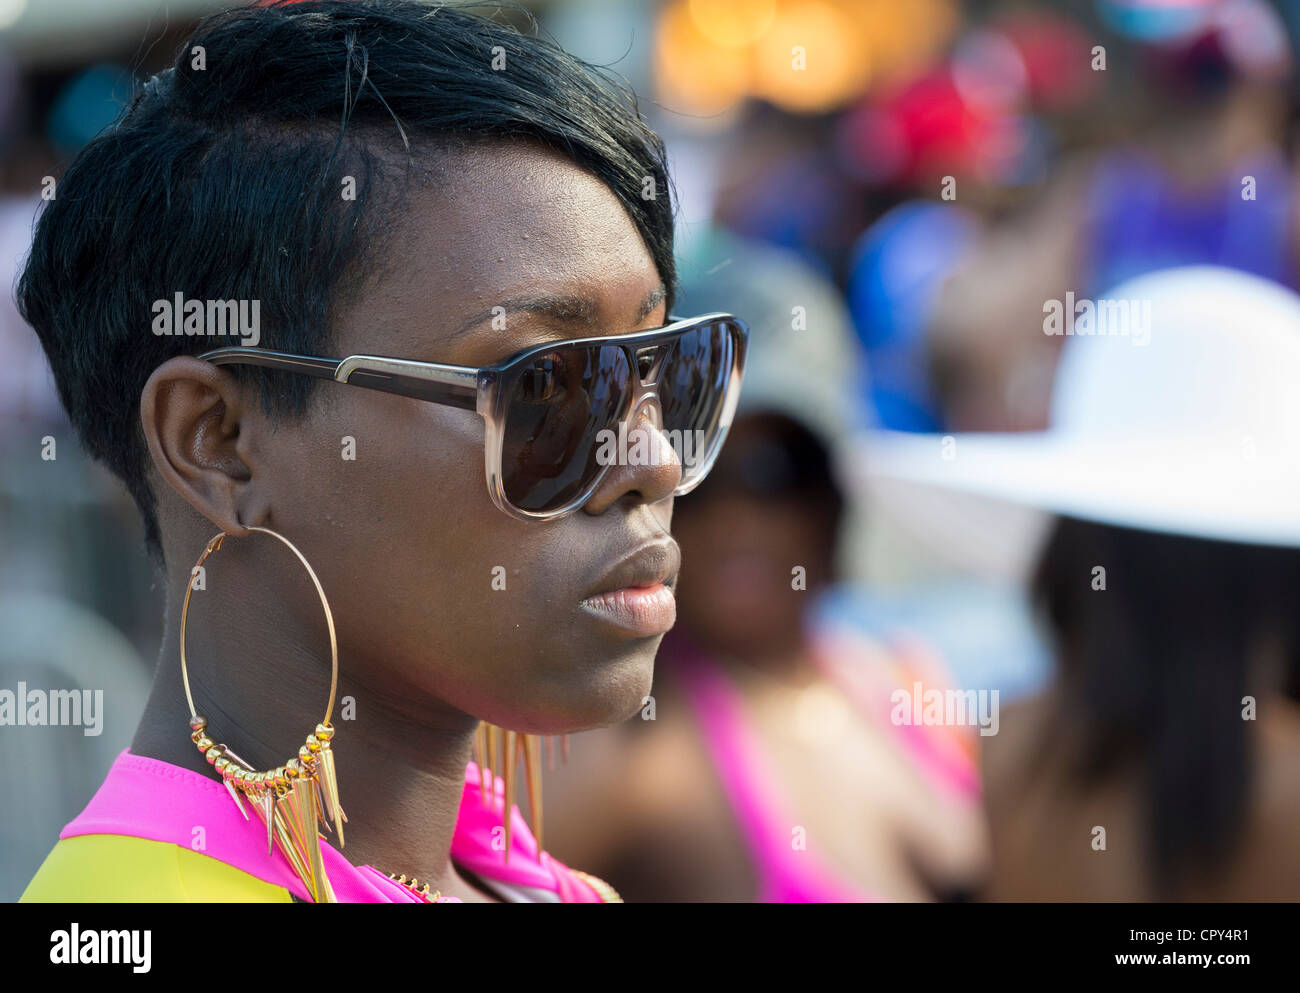 MIAMI - May 26, 2012: Portrait of woman during the Miami Beach Urban Weekend, this is the largest Urban Festival in the World, that caters towards the Hip Hop Generation. Over 300.000 participants make the annual trek to South Beach for 4 days full of fun, food, festivities, entertainment, music, and more. Stock Photo